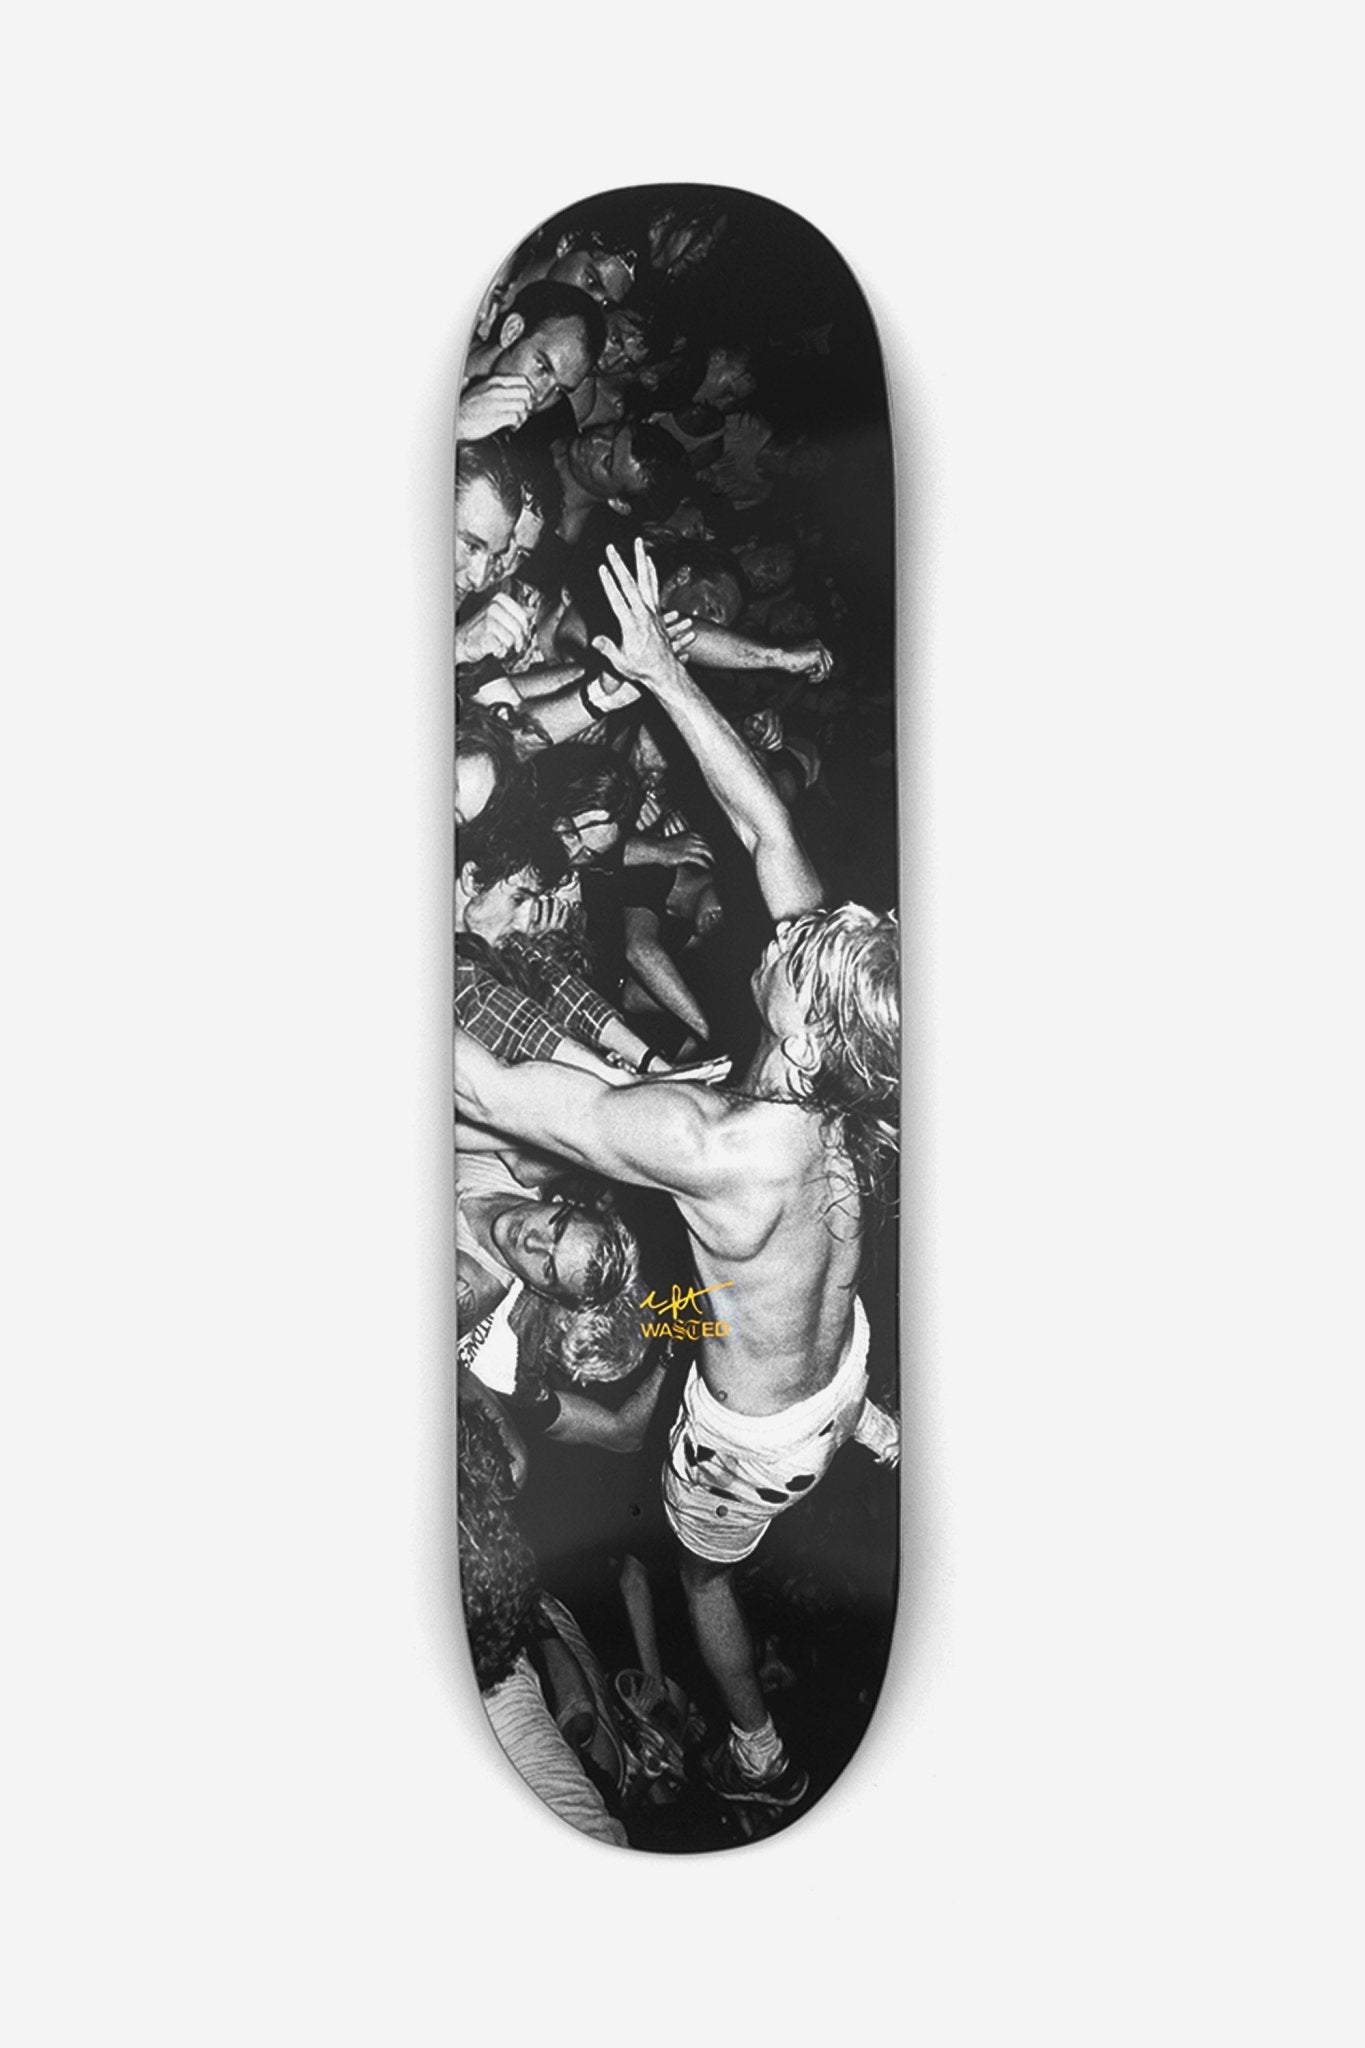 Board Sick Wasted x Charles Peterson Black